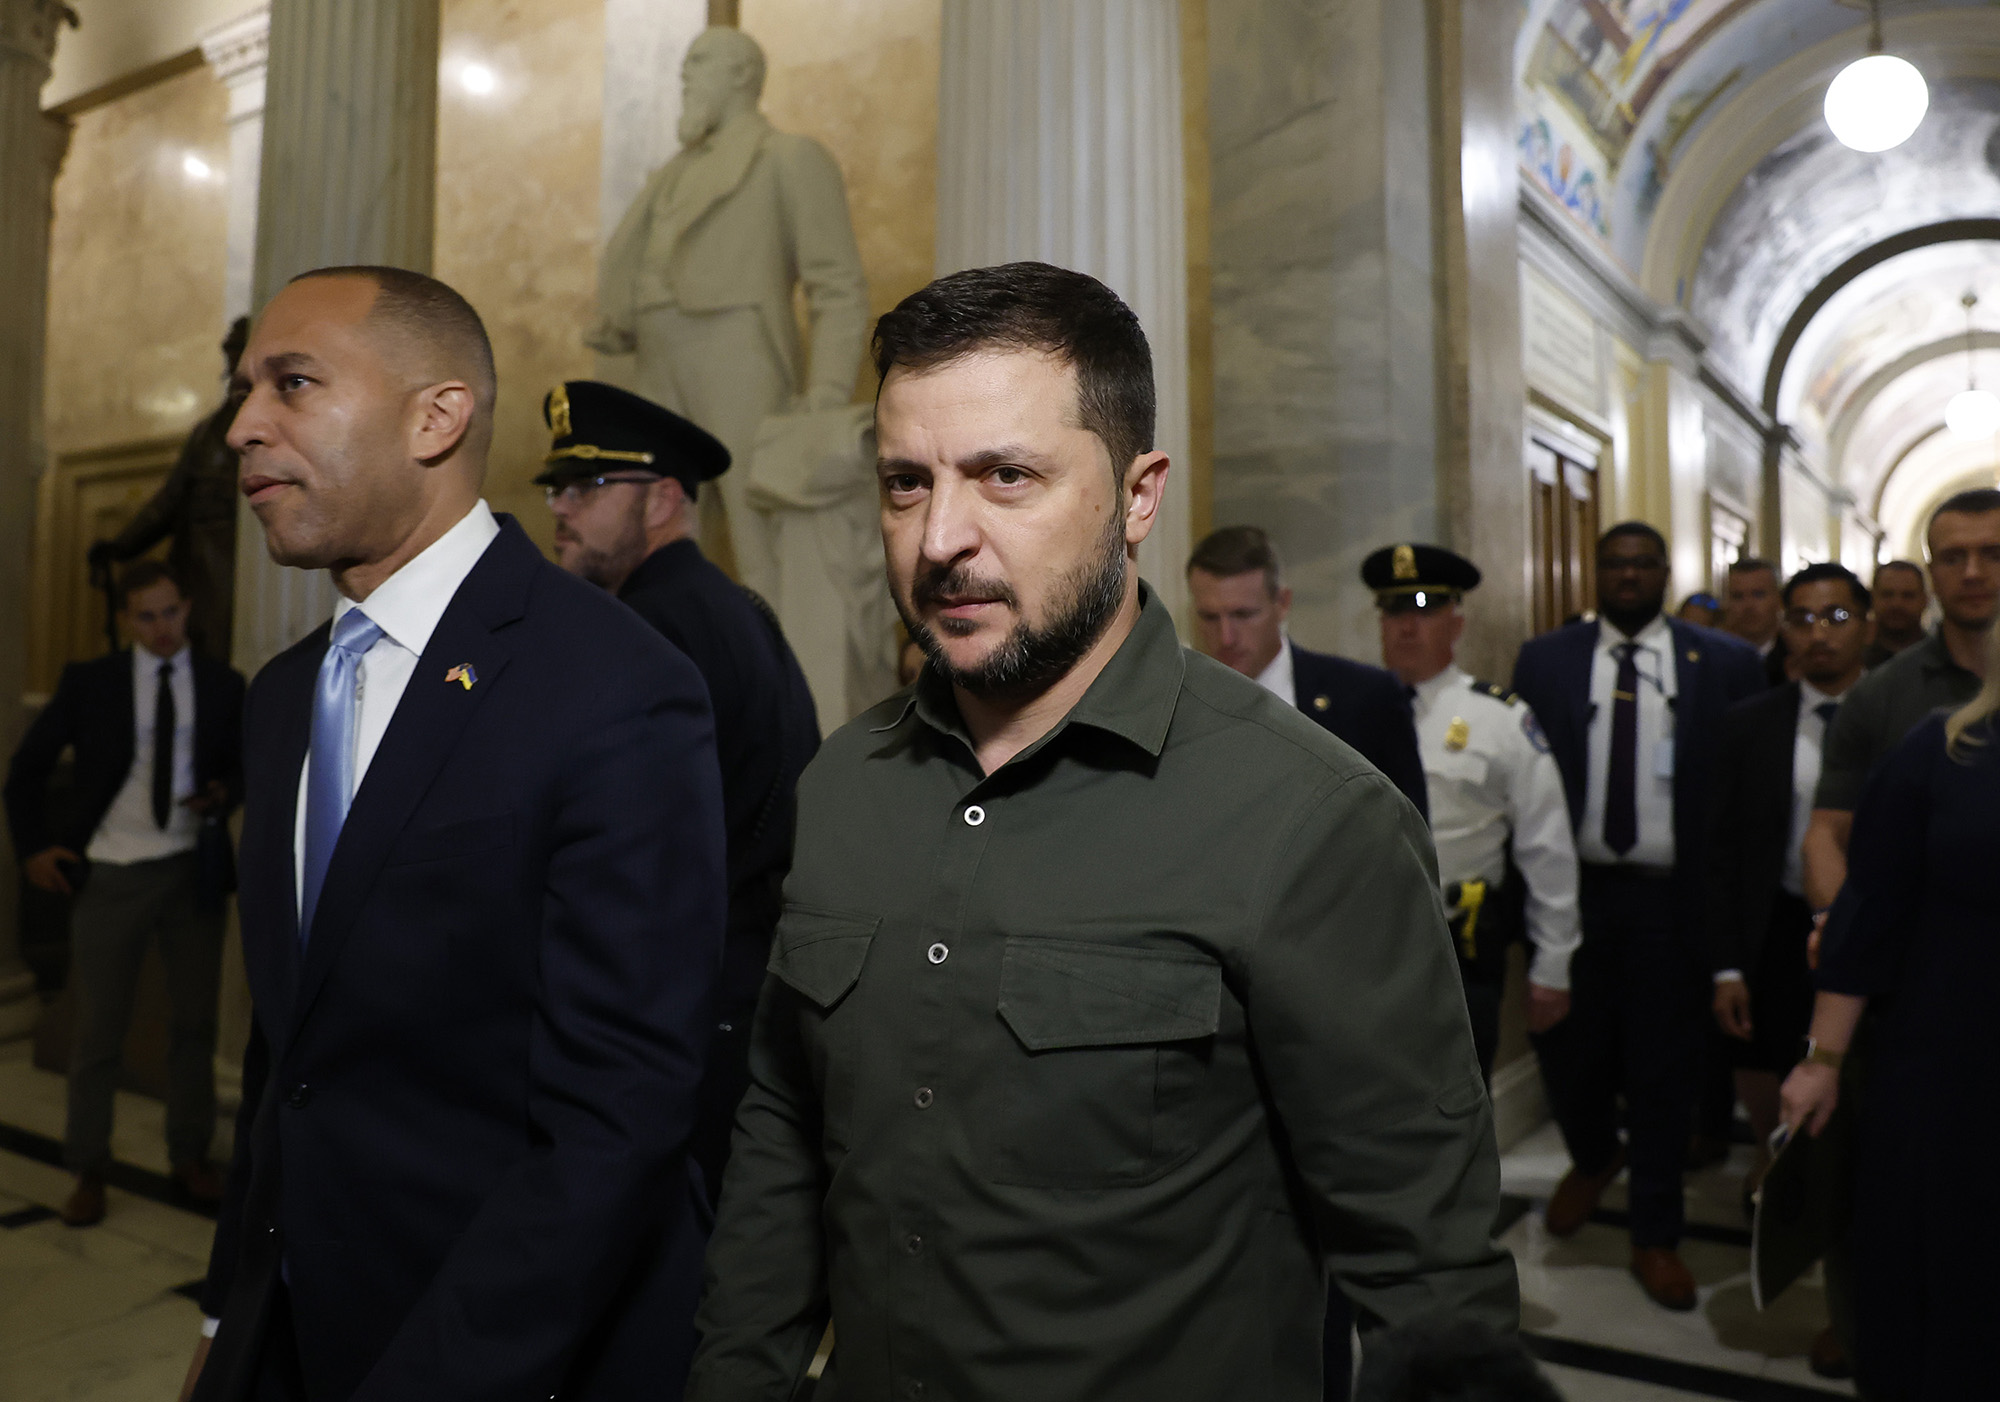 President of Ukraine Volodymyr Zelensky walks with Minority Leader Rep. Hakeem Jeffries as he arrives for a meeting with members of the U.S. House of Representatives at the U.S. Capitol on September 21, in Washington, DC. 